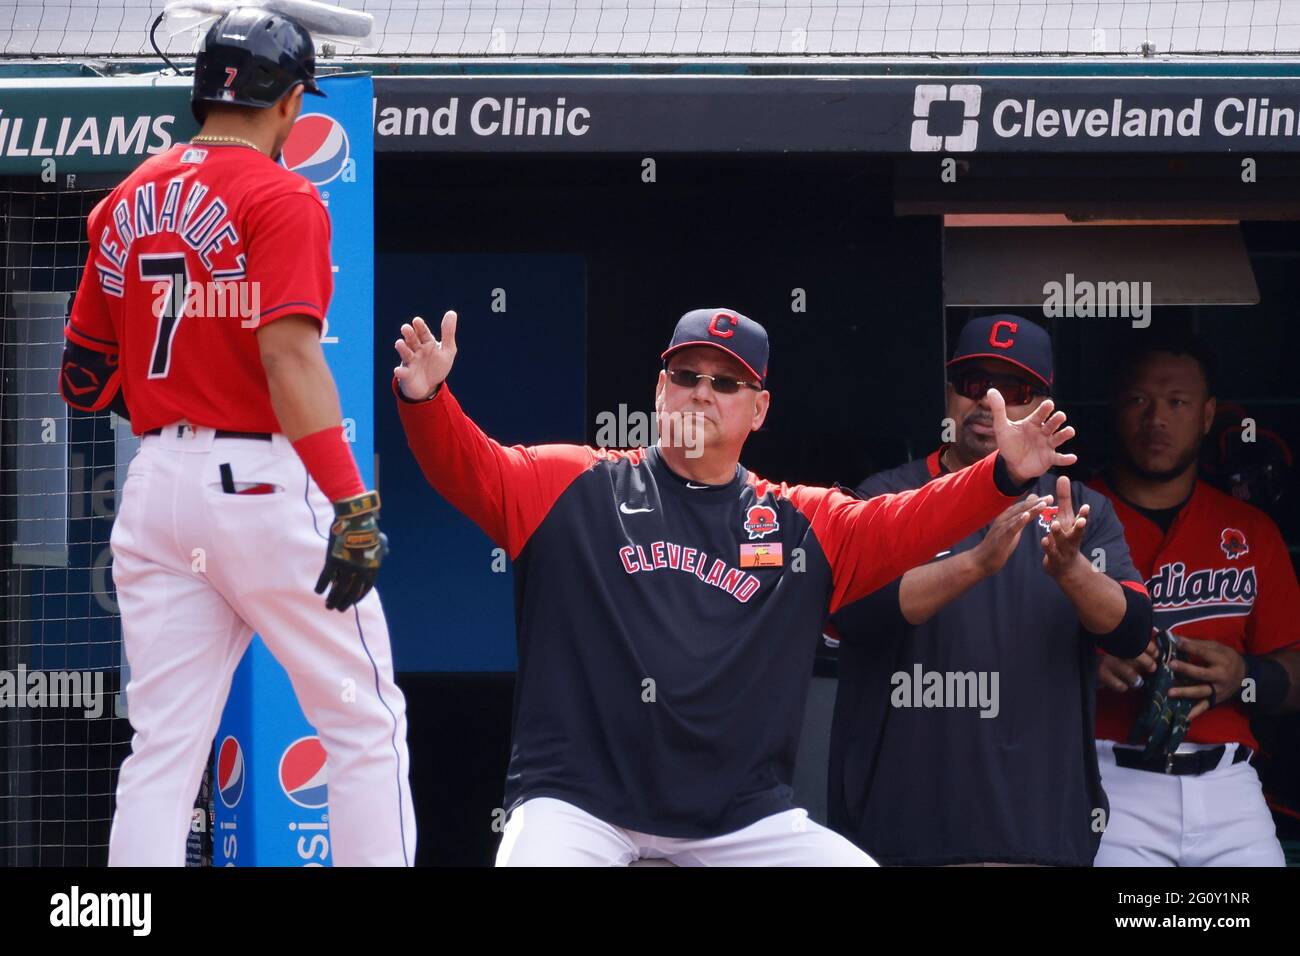 CLEVELAND, OH - MAY 31: Manager Terry Francona of the Cleveland Indians waits to congratulate Cesar Hernandez (7) after his home run during a game aga Stock Photo